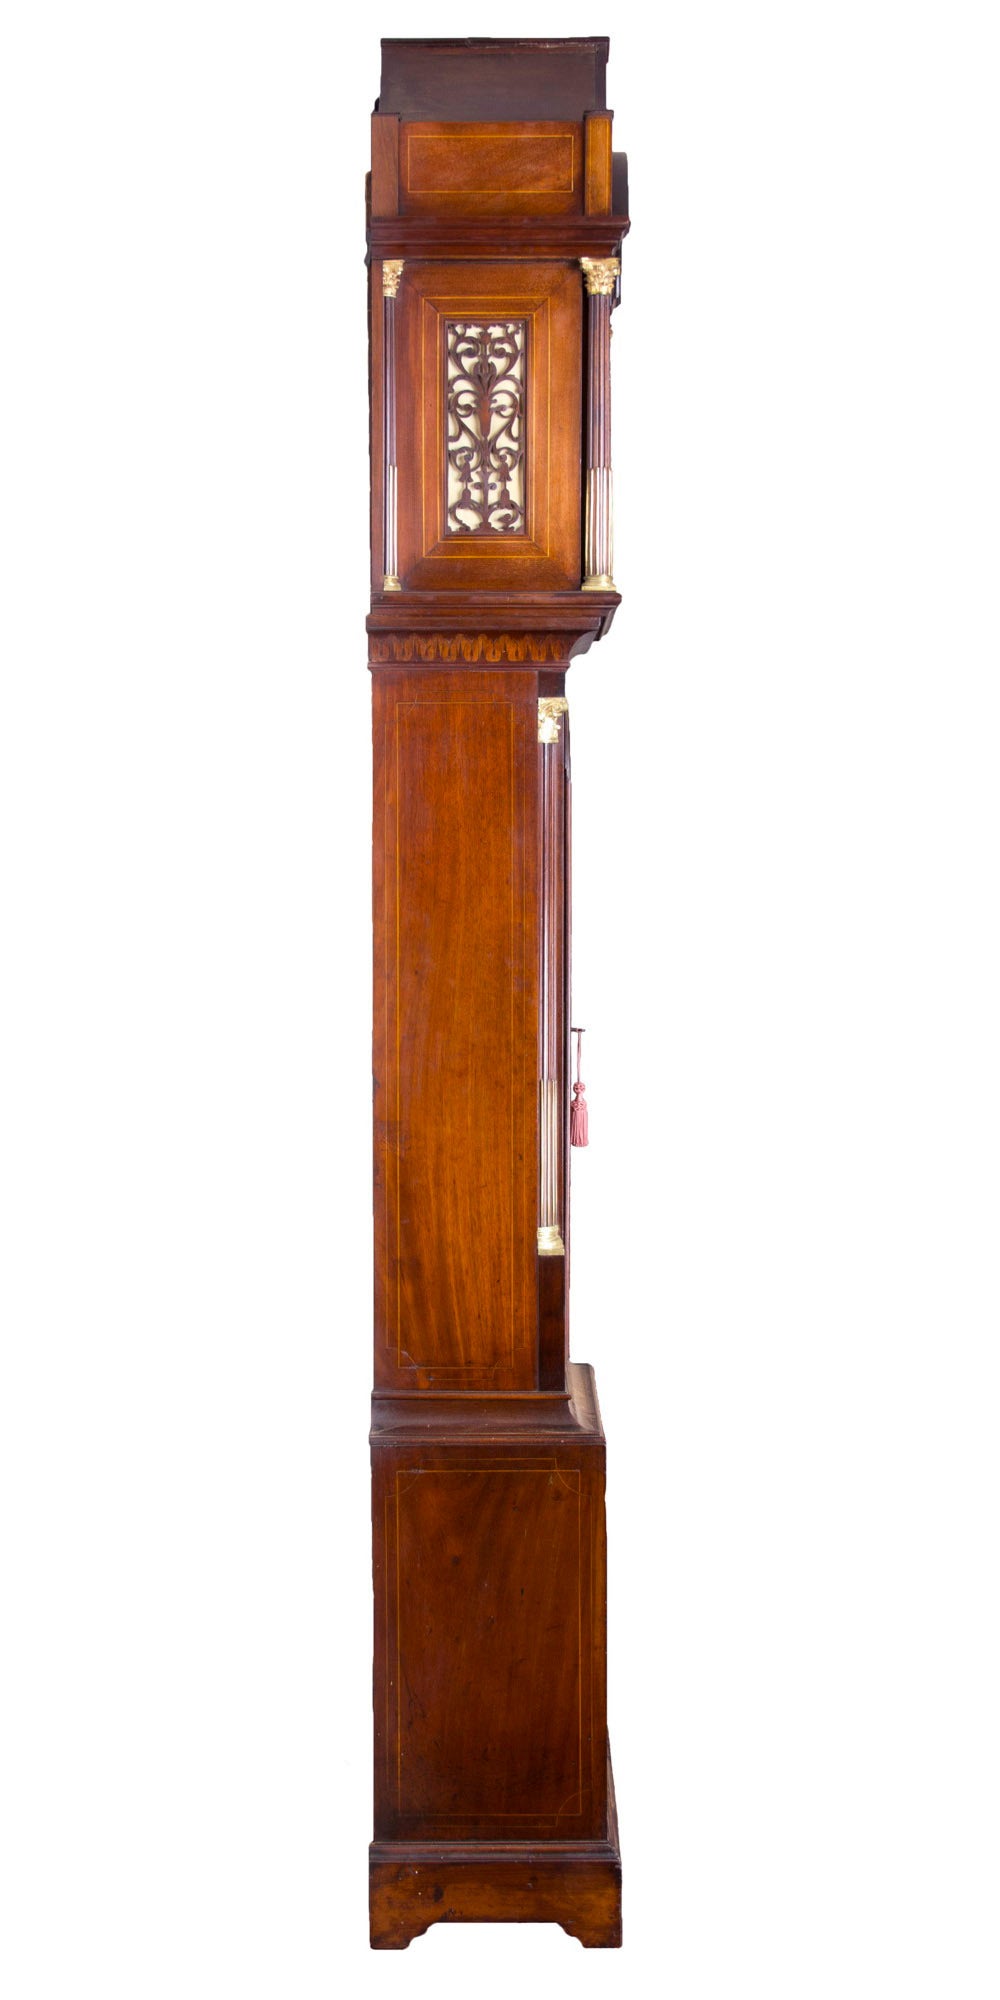 This clock is a tour de force with fabulous inlay throughout. The base is its own composition with vase. The mid-case door showcases inlaid flowers, harvest products, etc. on a beautifully striped mahogany surface as does the pagoda top and lower